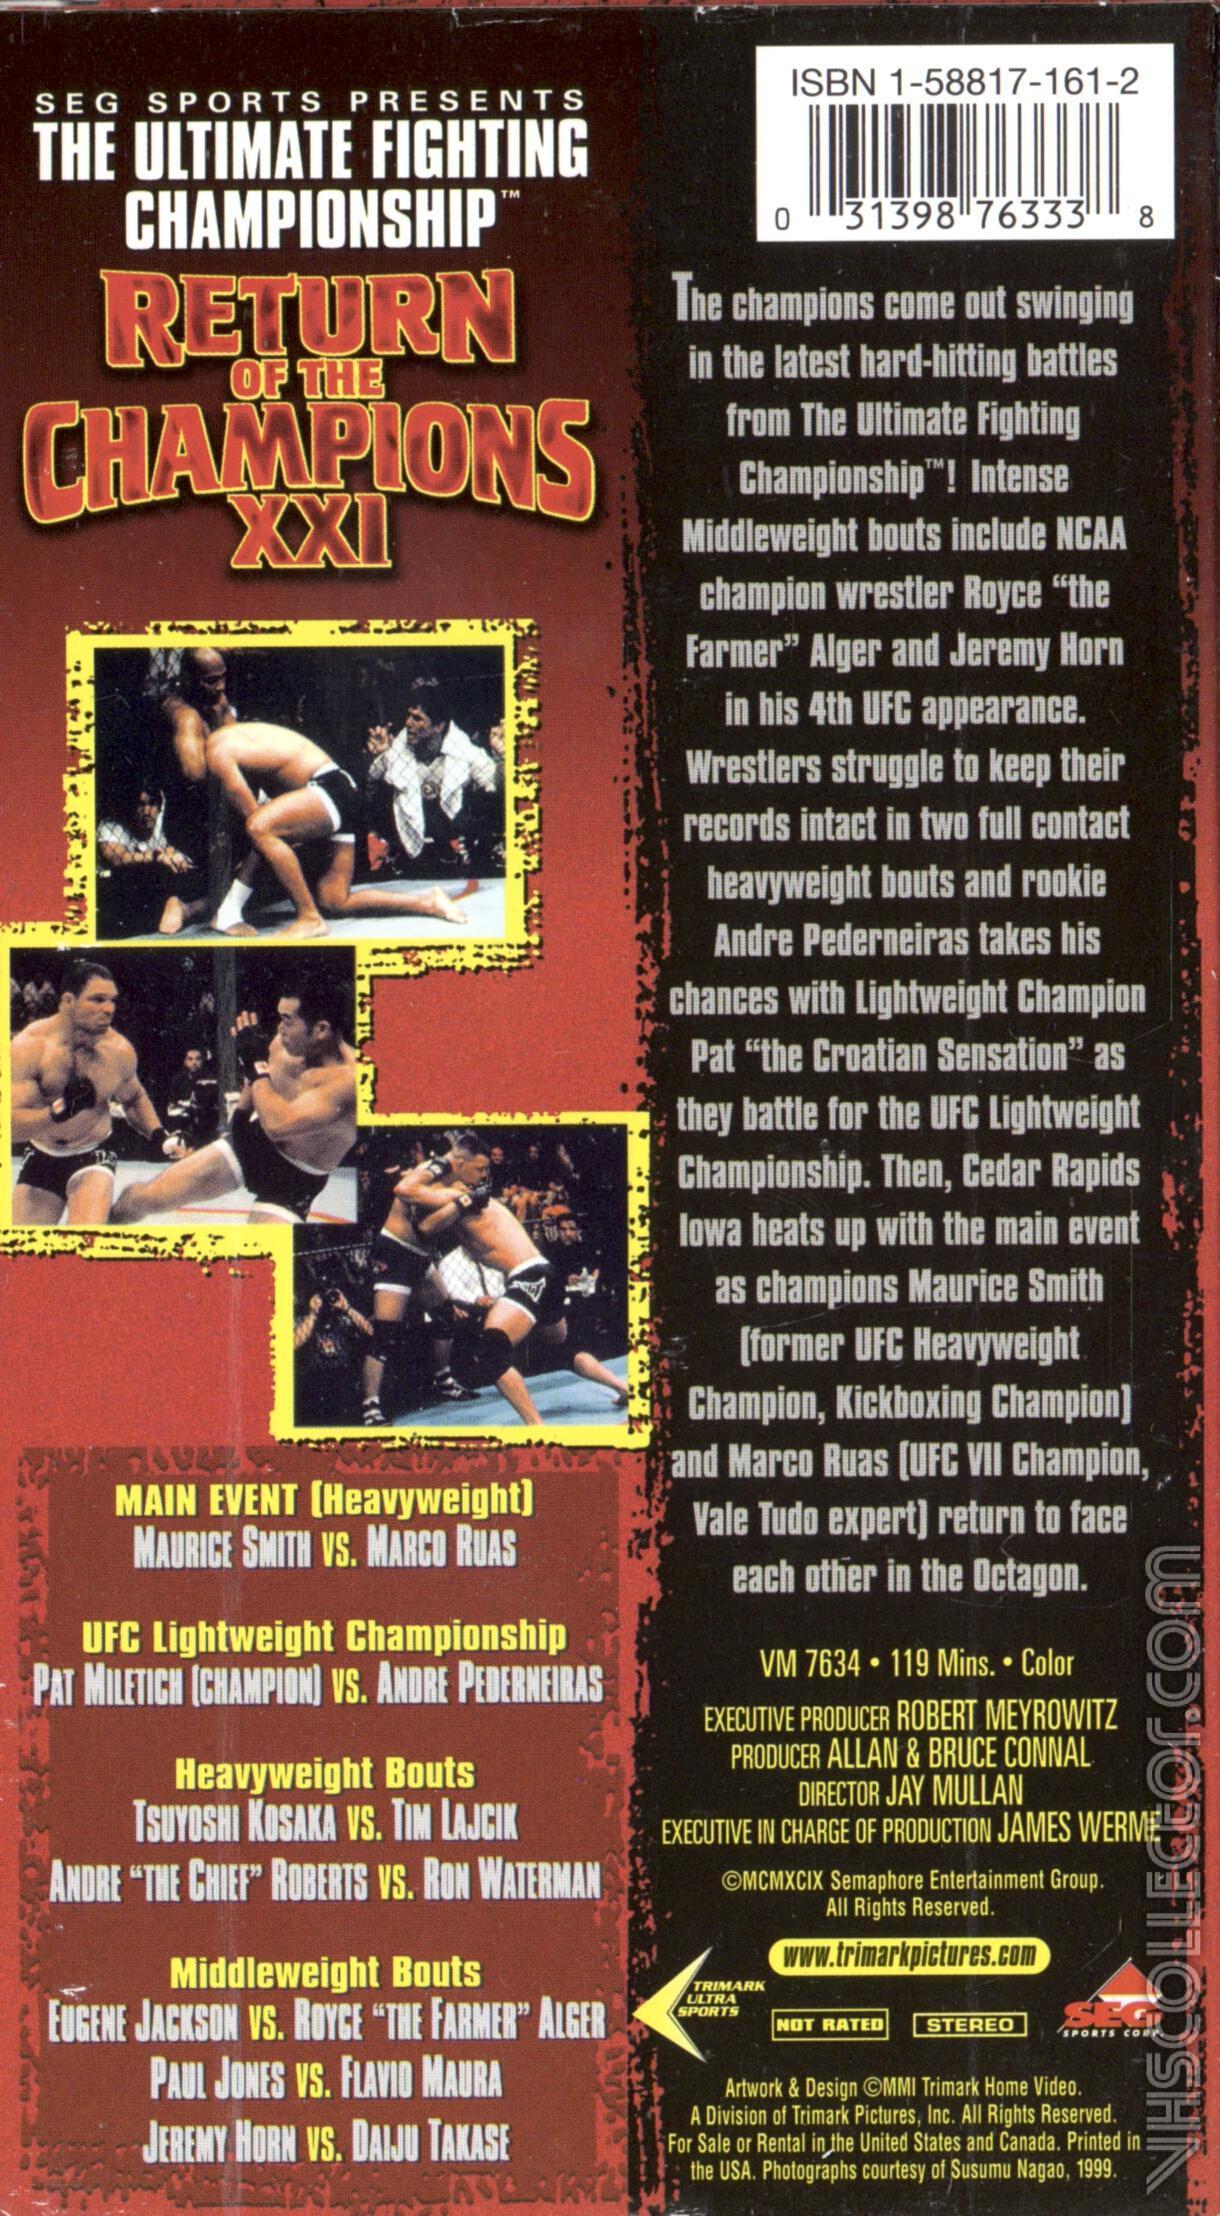 The Ultimate Fighting Championship XXI: Return of the Champions |  VHSCollector.com